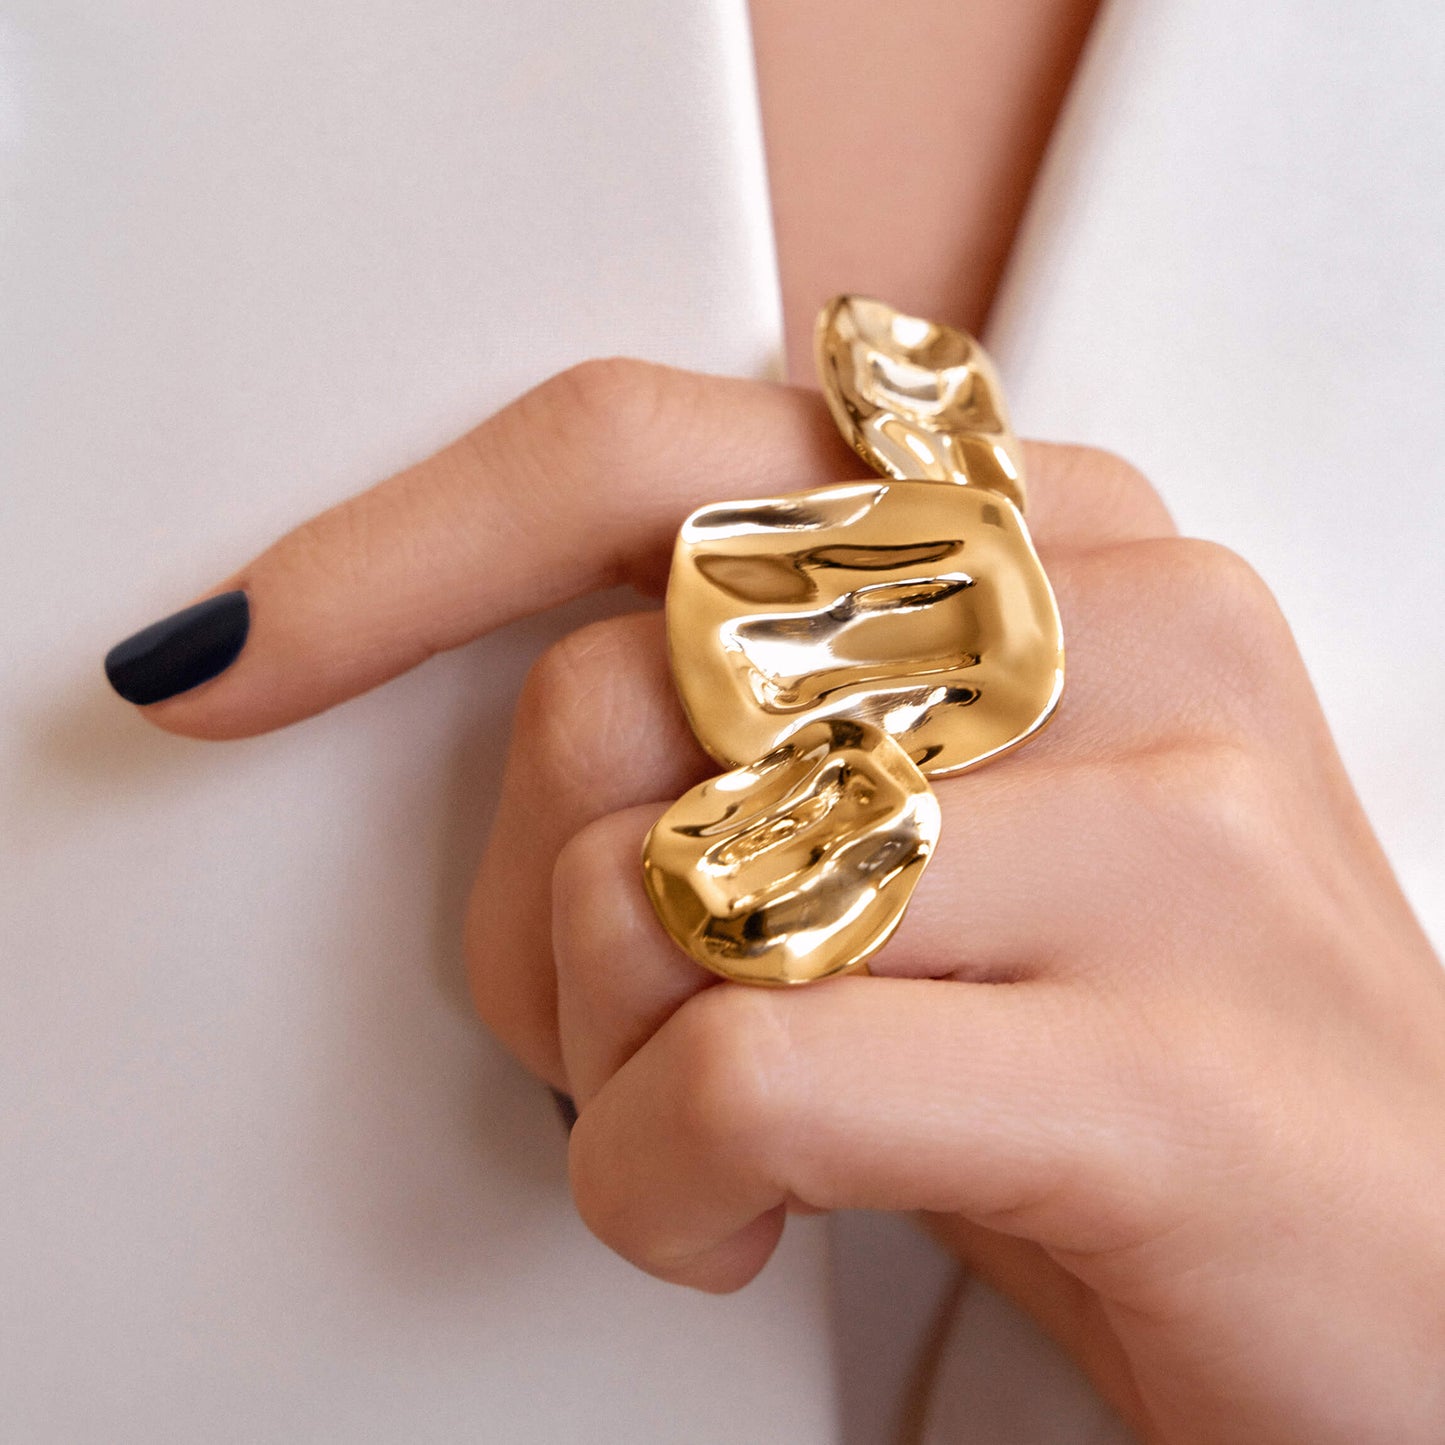 The Artist Palette Ring (S) is a Palette Ring -Brass -Makeup- made by Doublemoss Arte